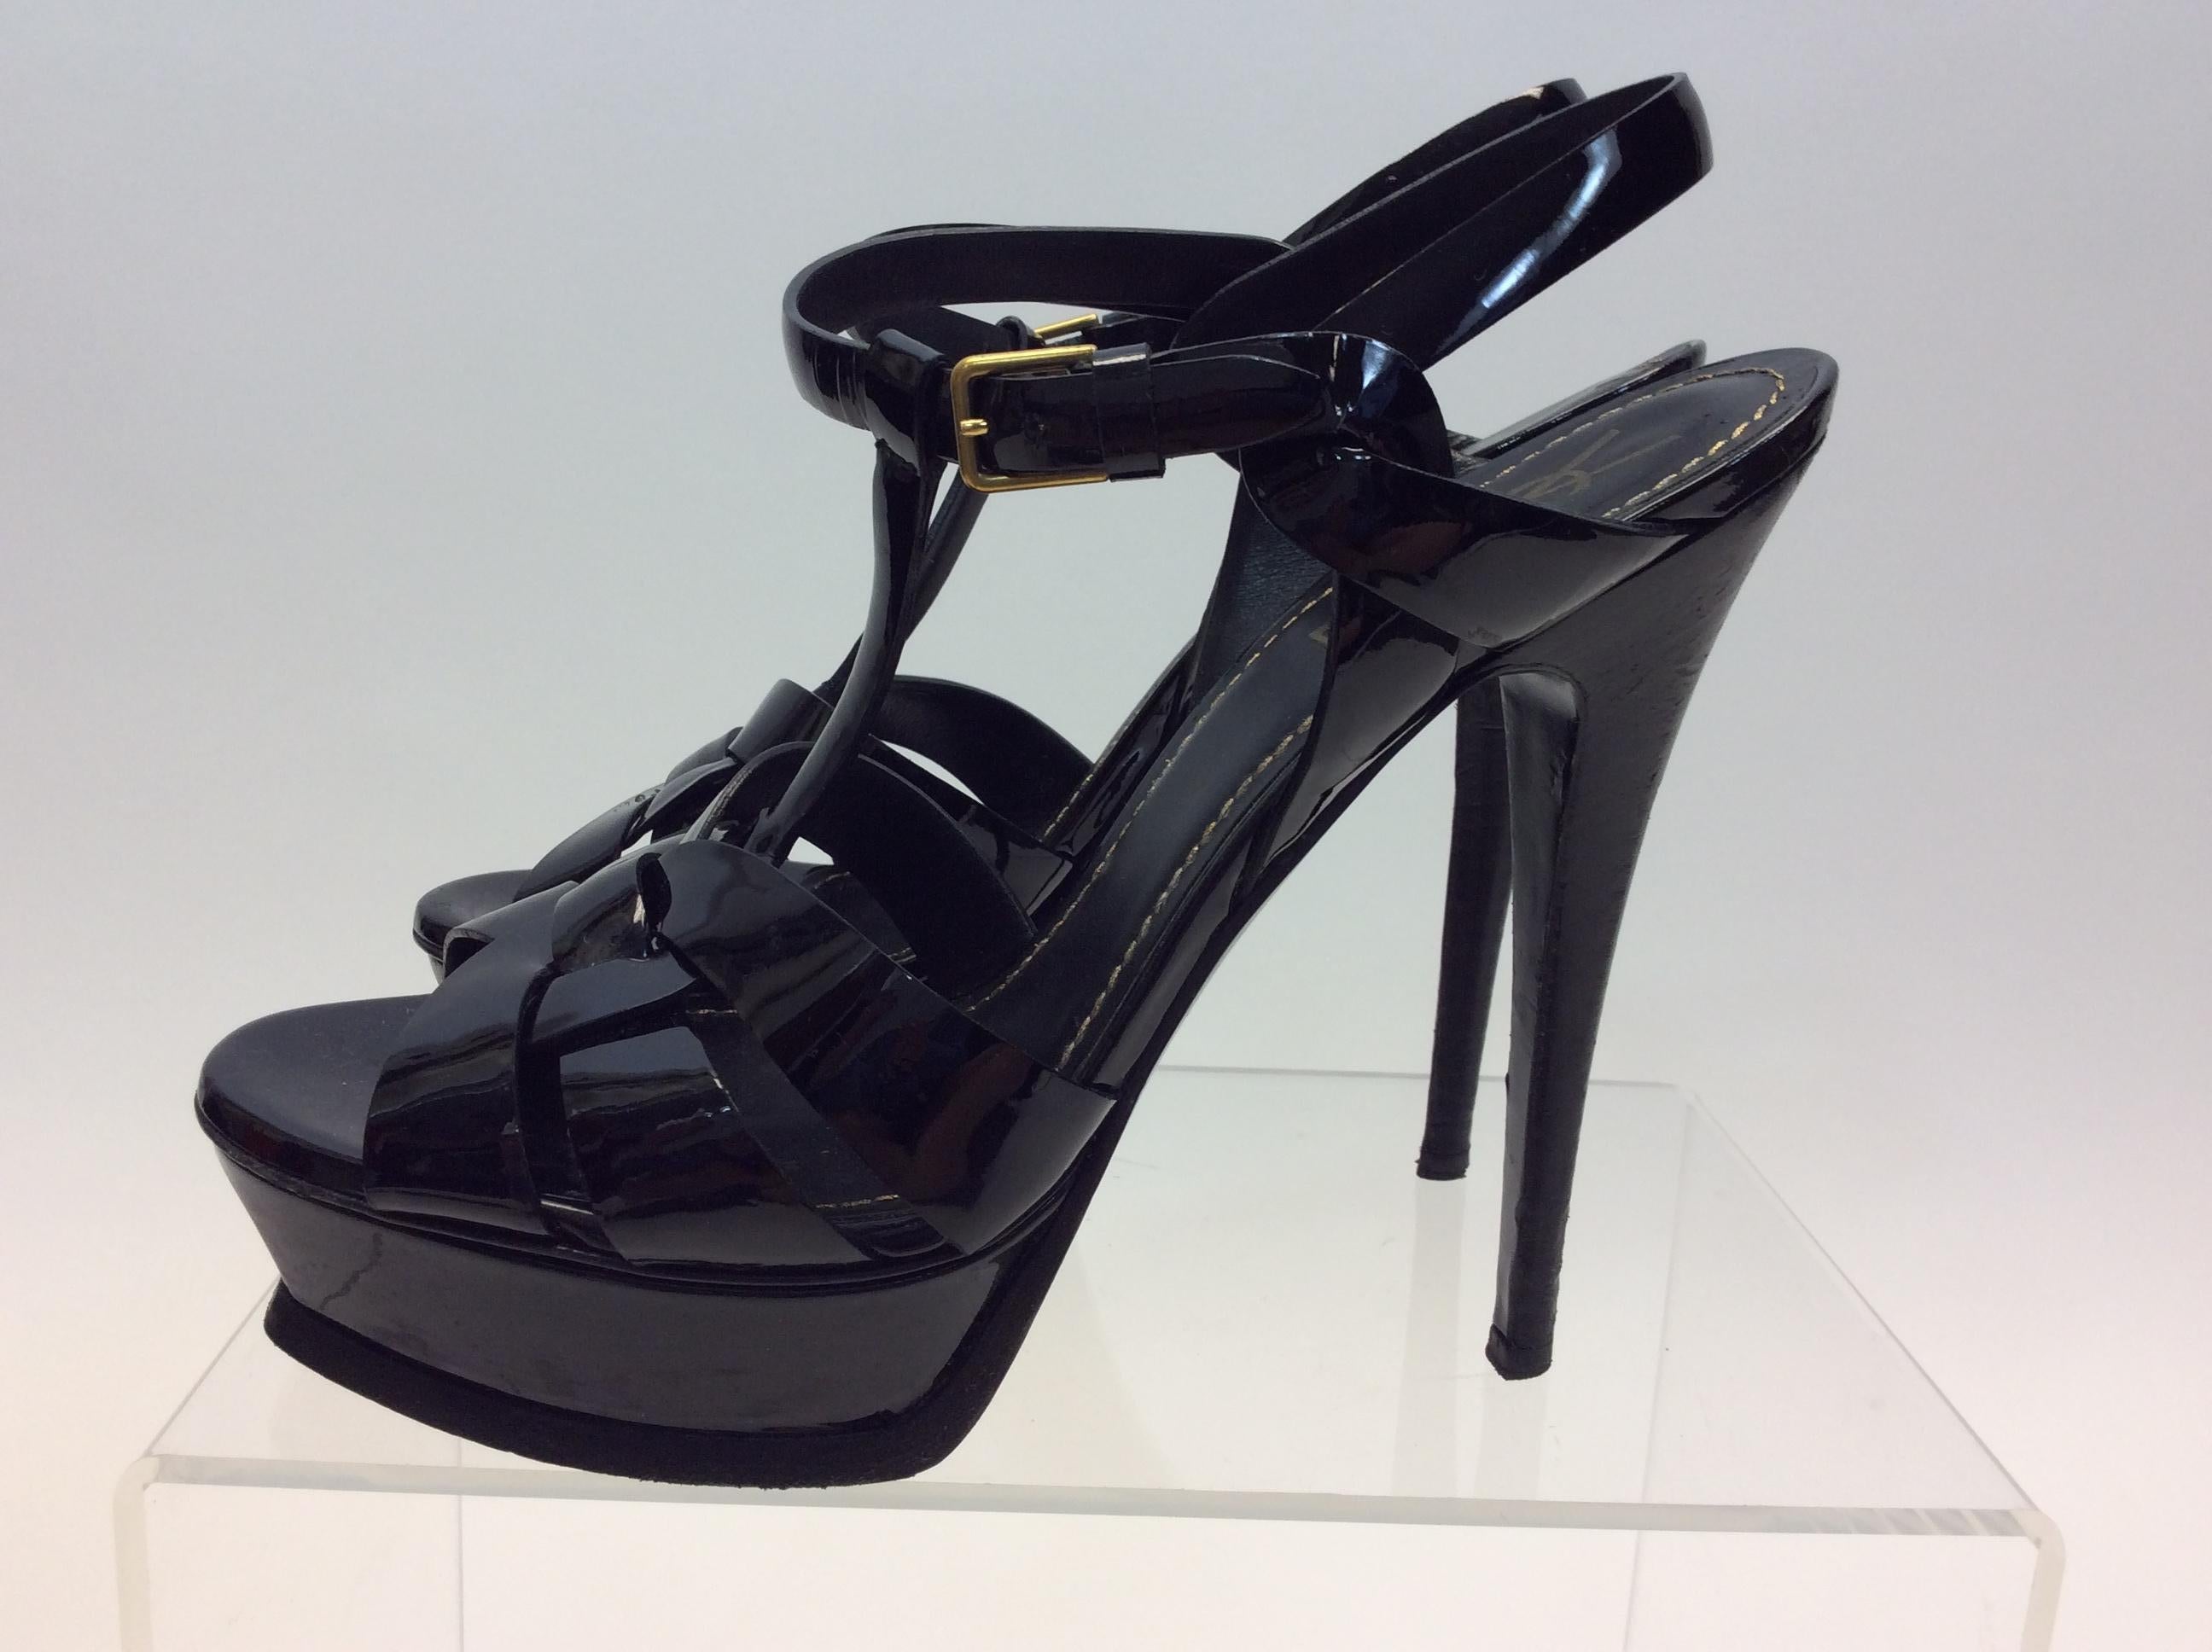 Yves Saint Laurent Black Patent Leather Tribute Heels

Made in Italy
Leather
Size 39
1” Platform
5.5” Heel